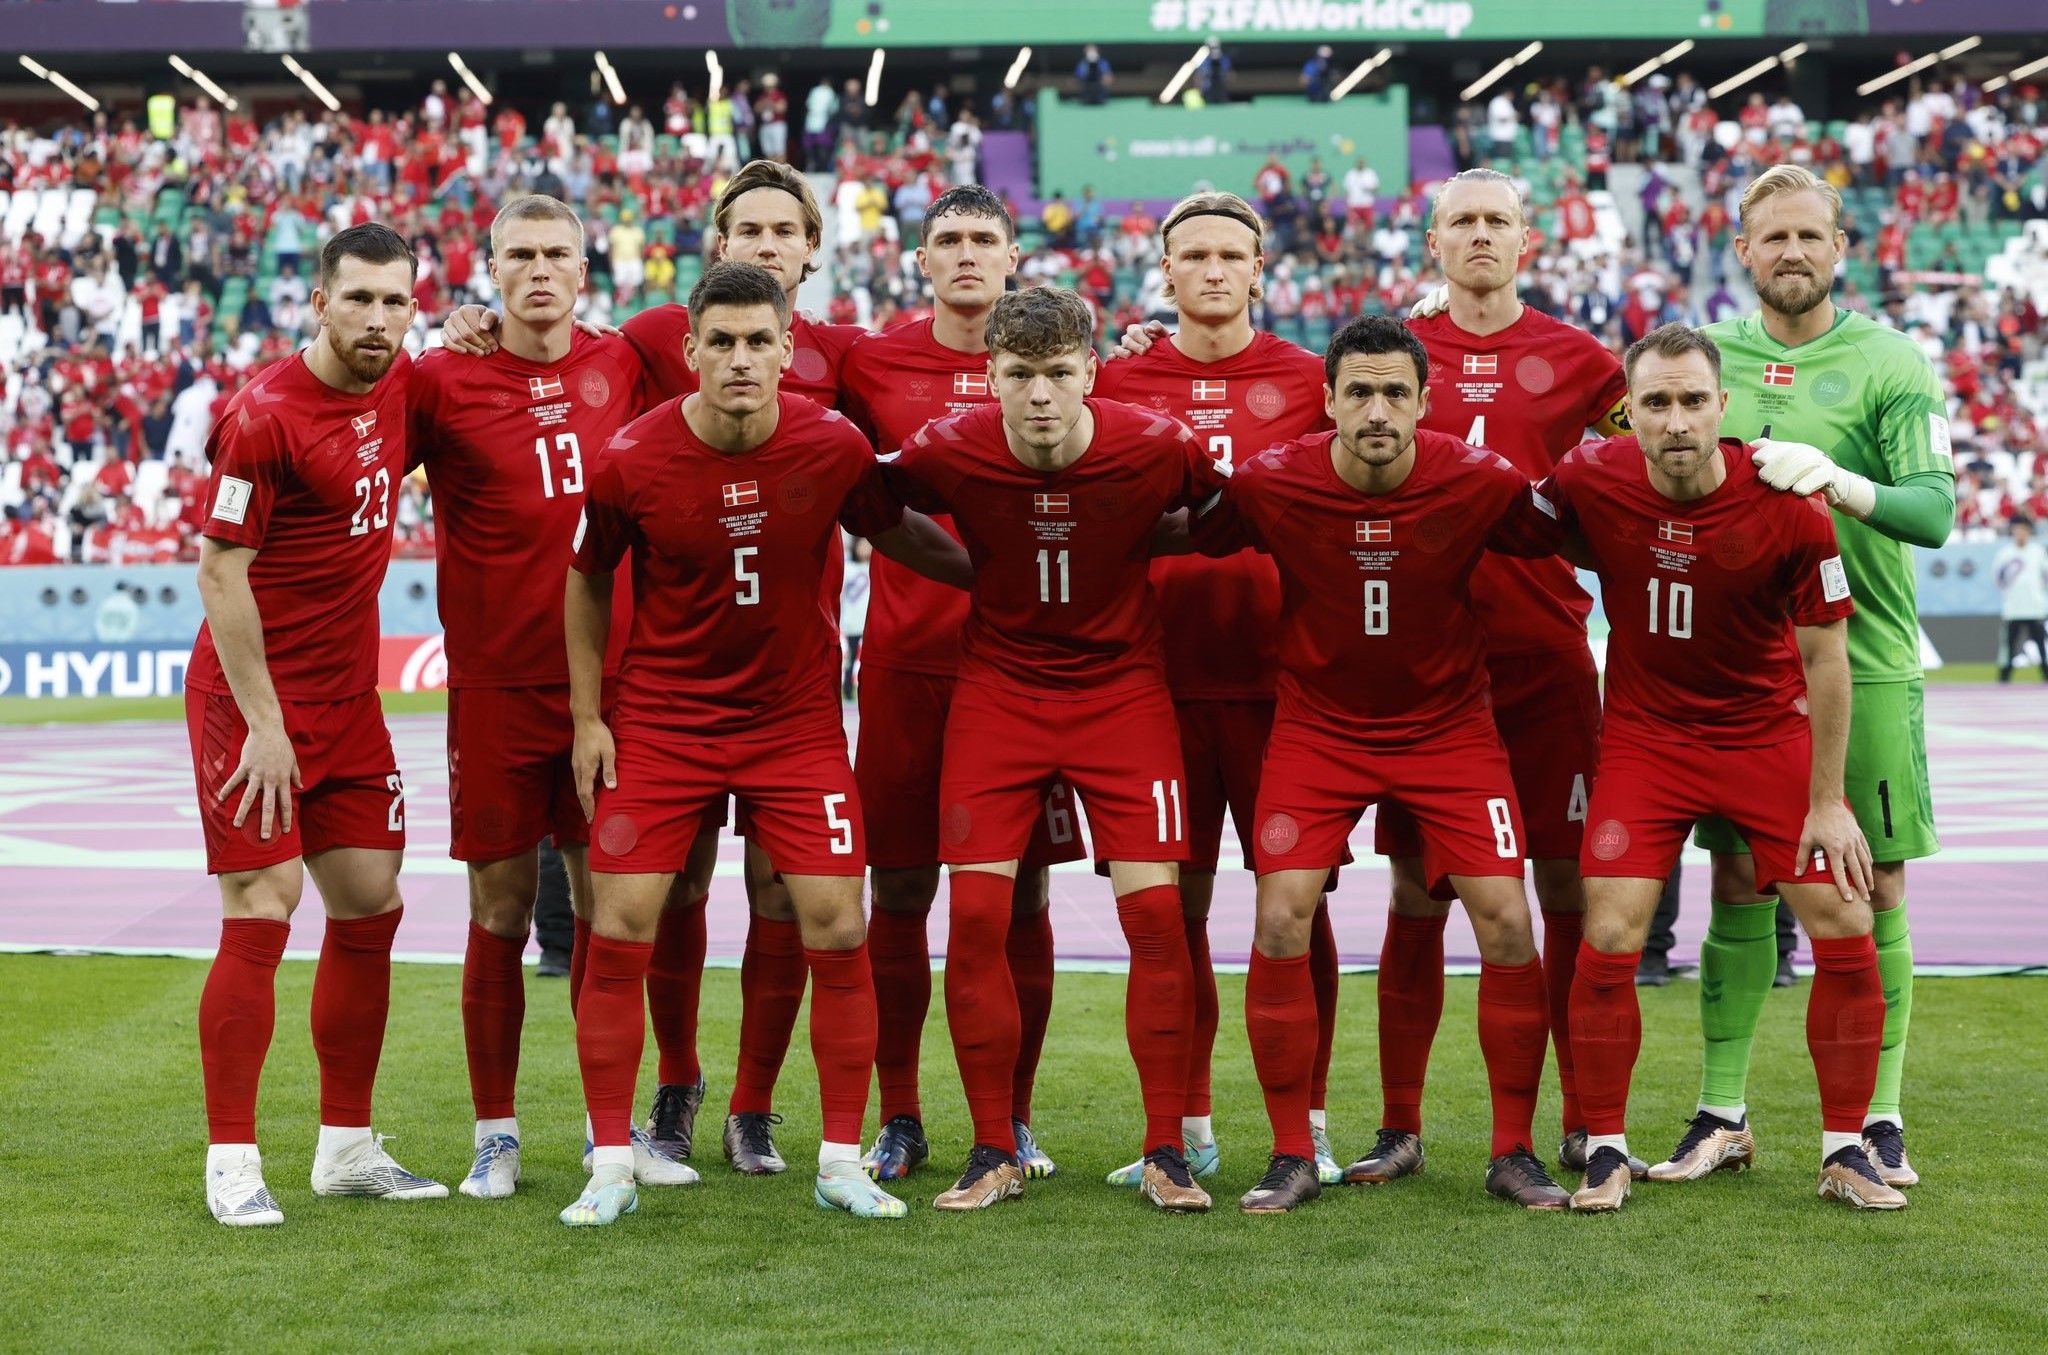 WC Round-Up: Denmark issues well-timed threat to pull out of FIFA ahead of European Parliament’s strong condemnation of world body